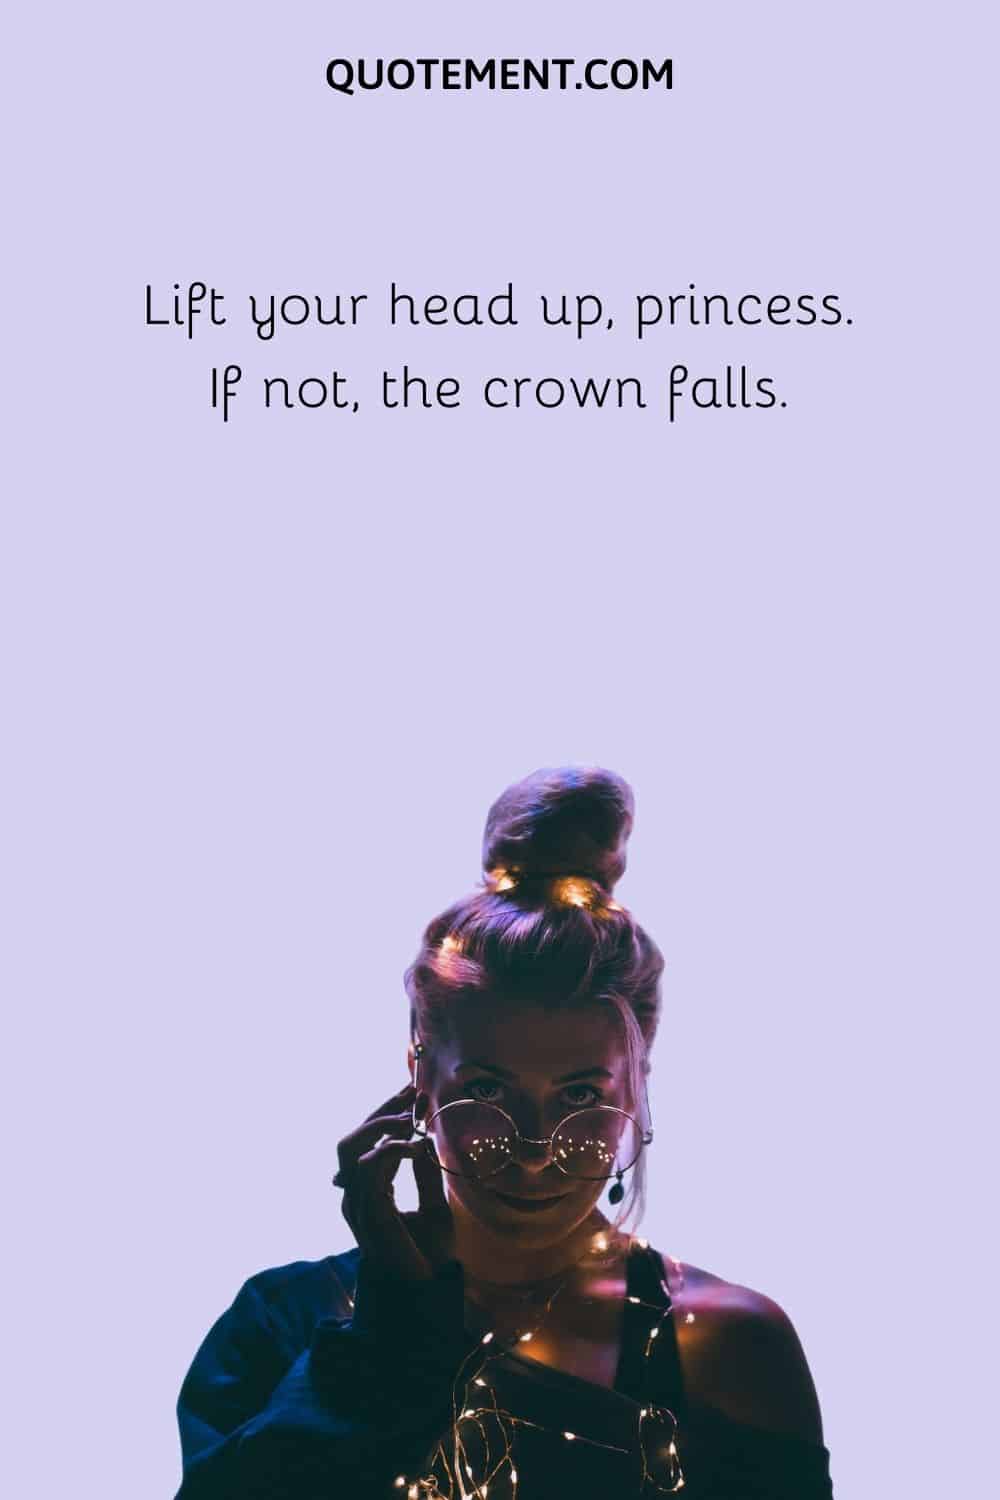 Lift your head up, princess. If not, the crown falls